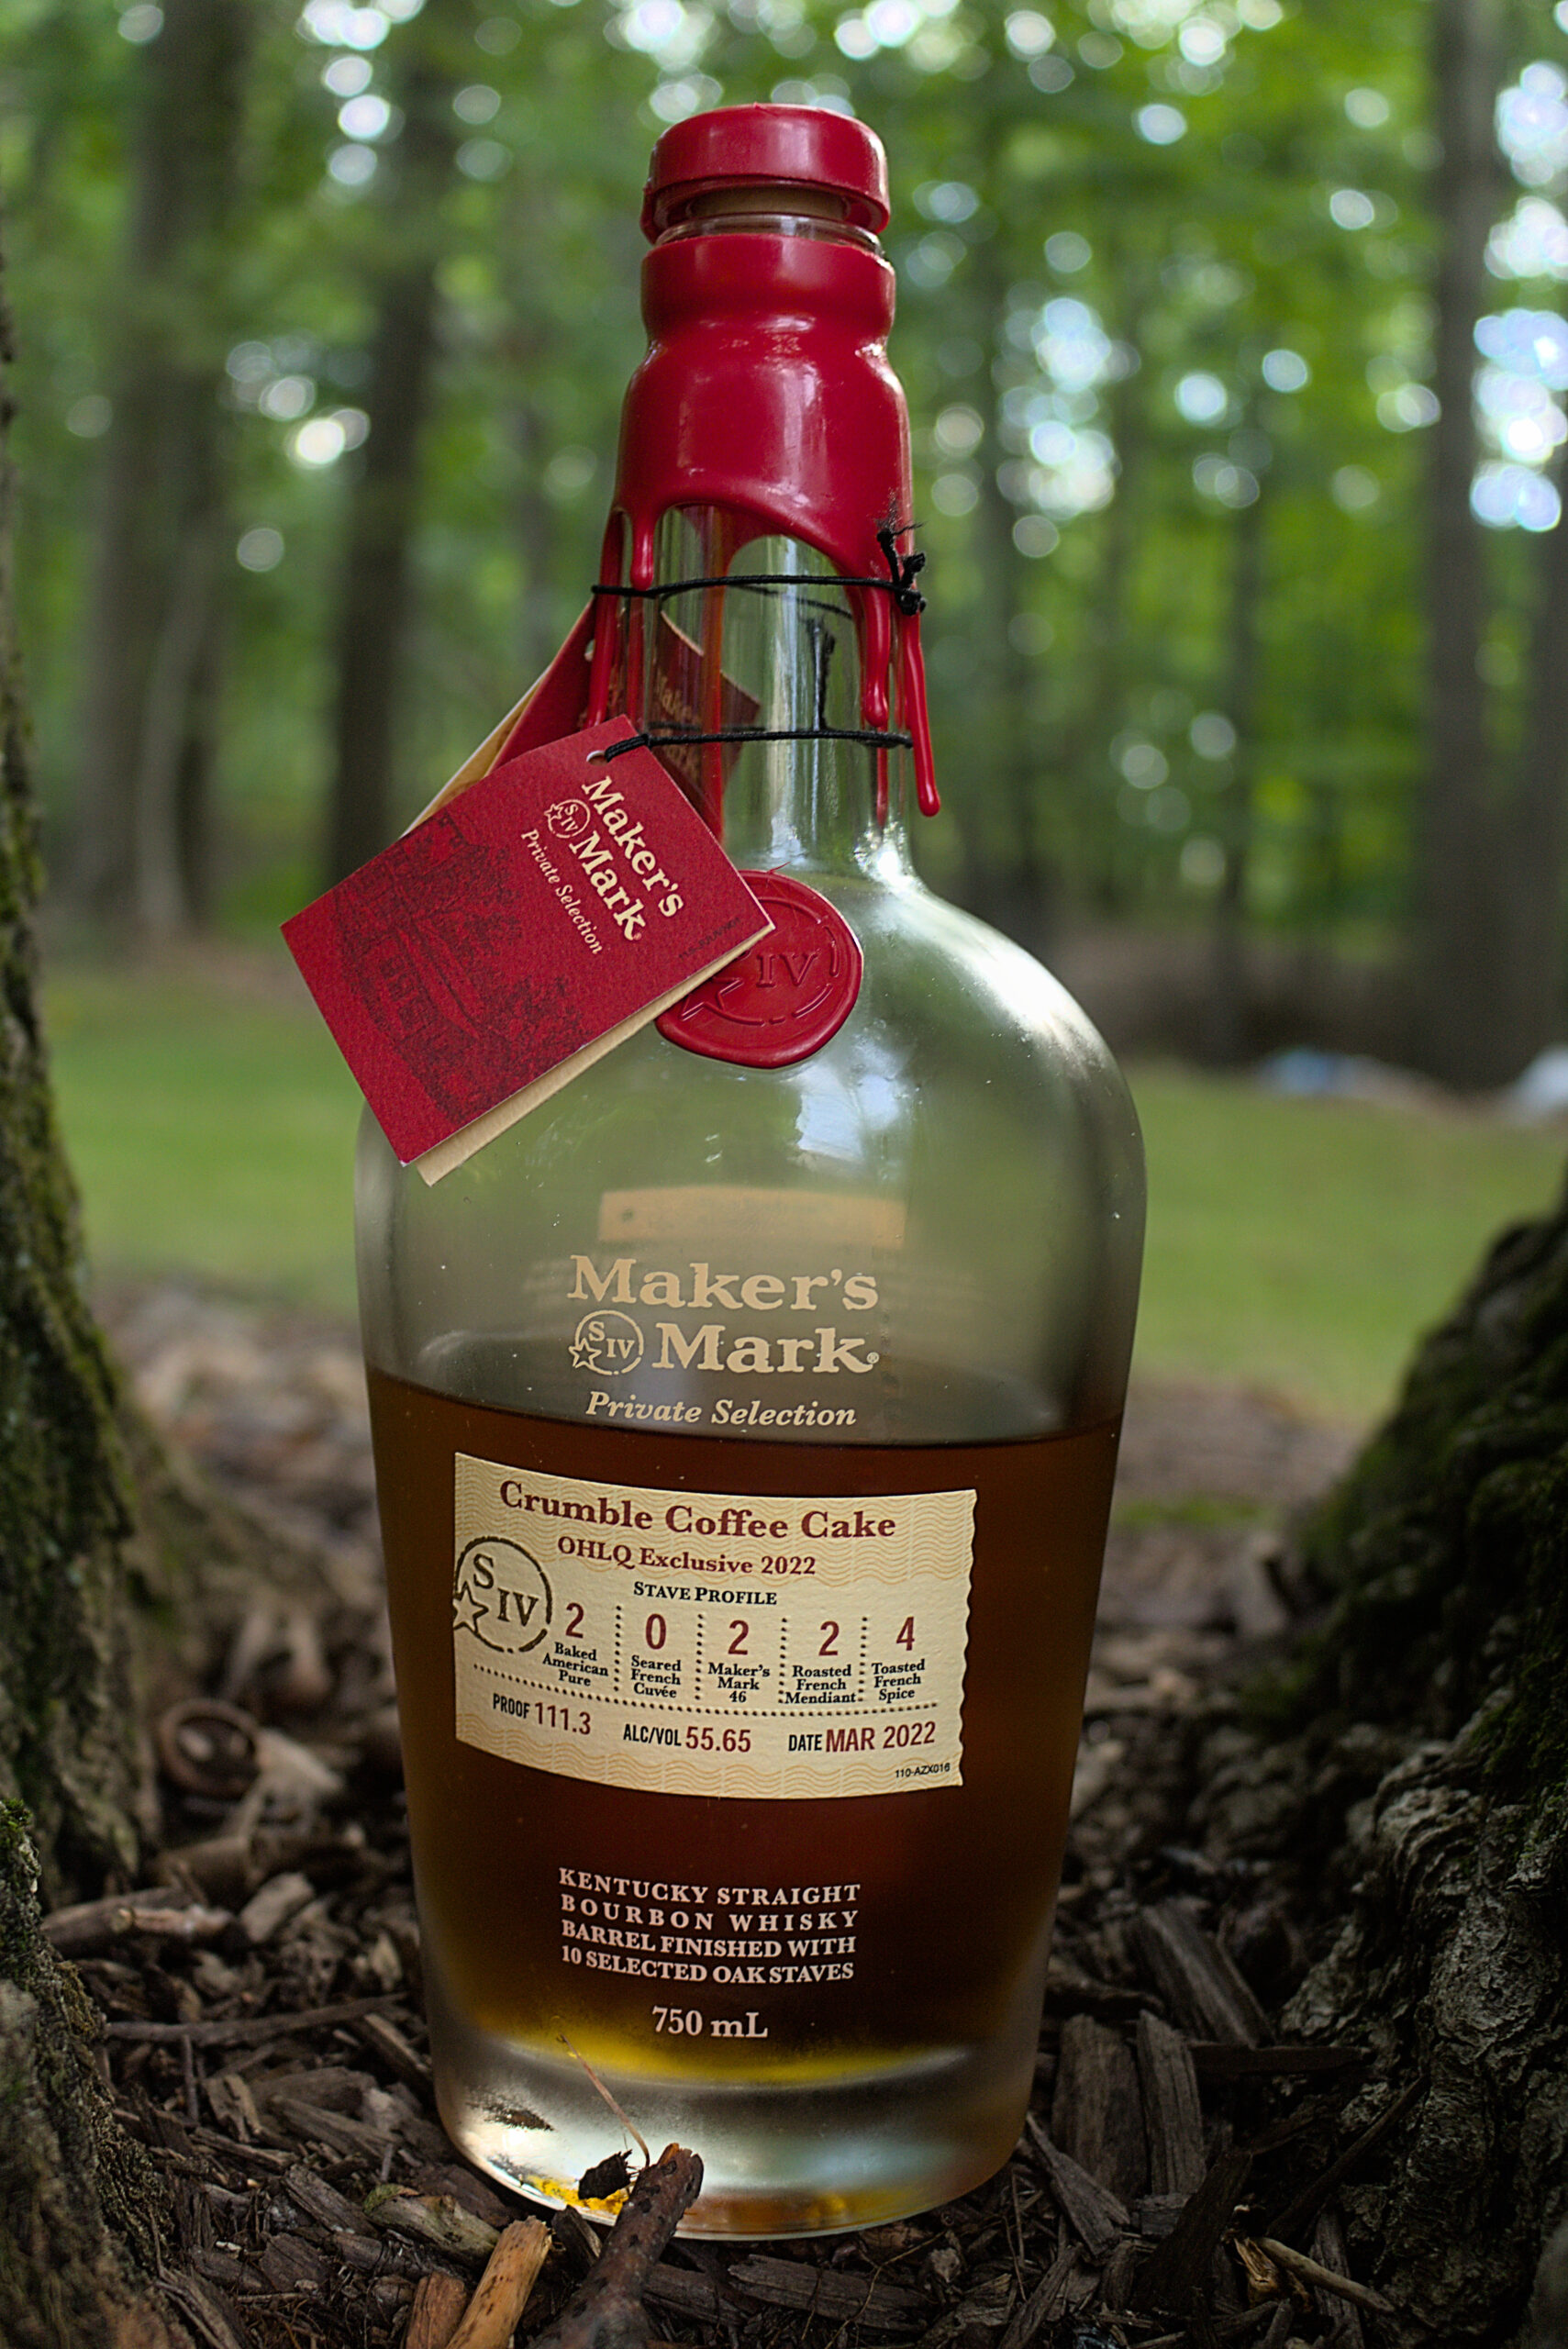 Maker's Mark Crumble Coffee Cake - OHLQ Exclusive 2022 Bottle